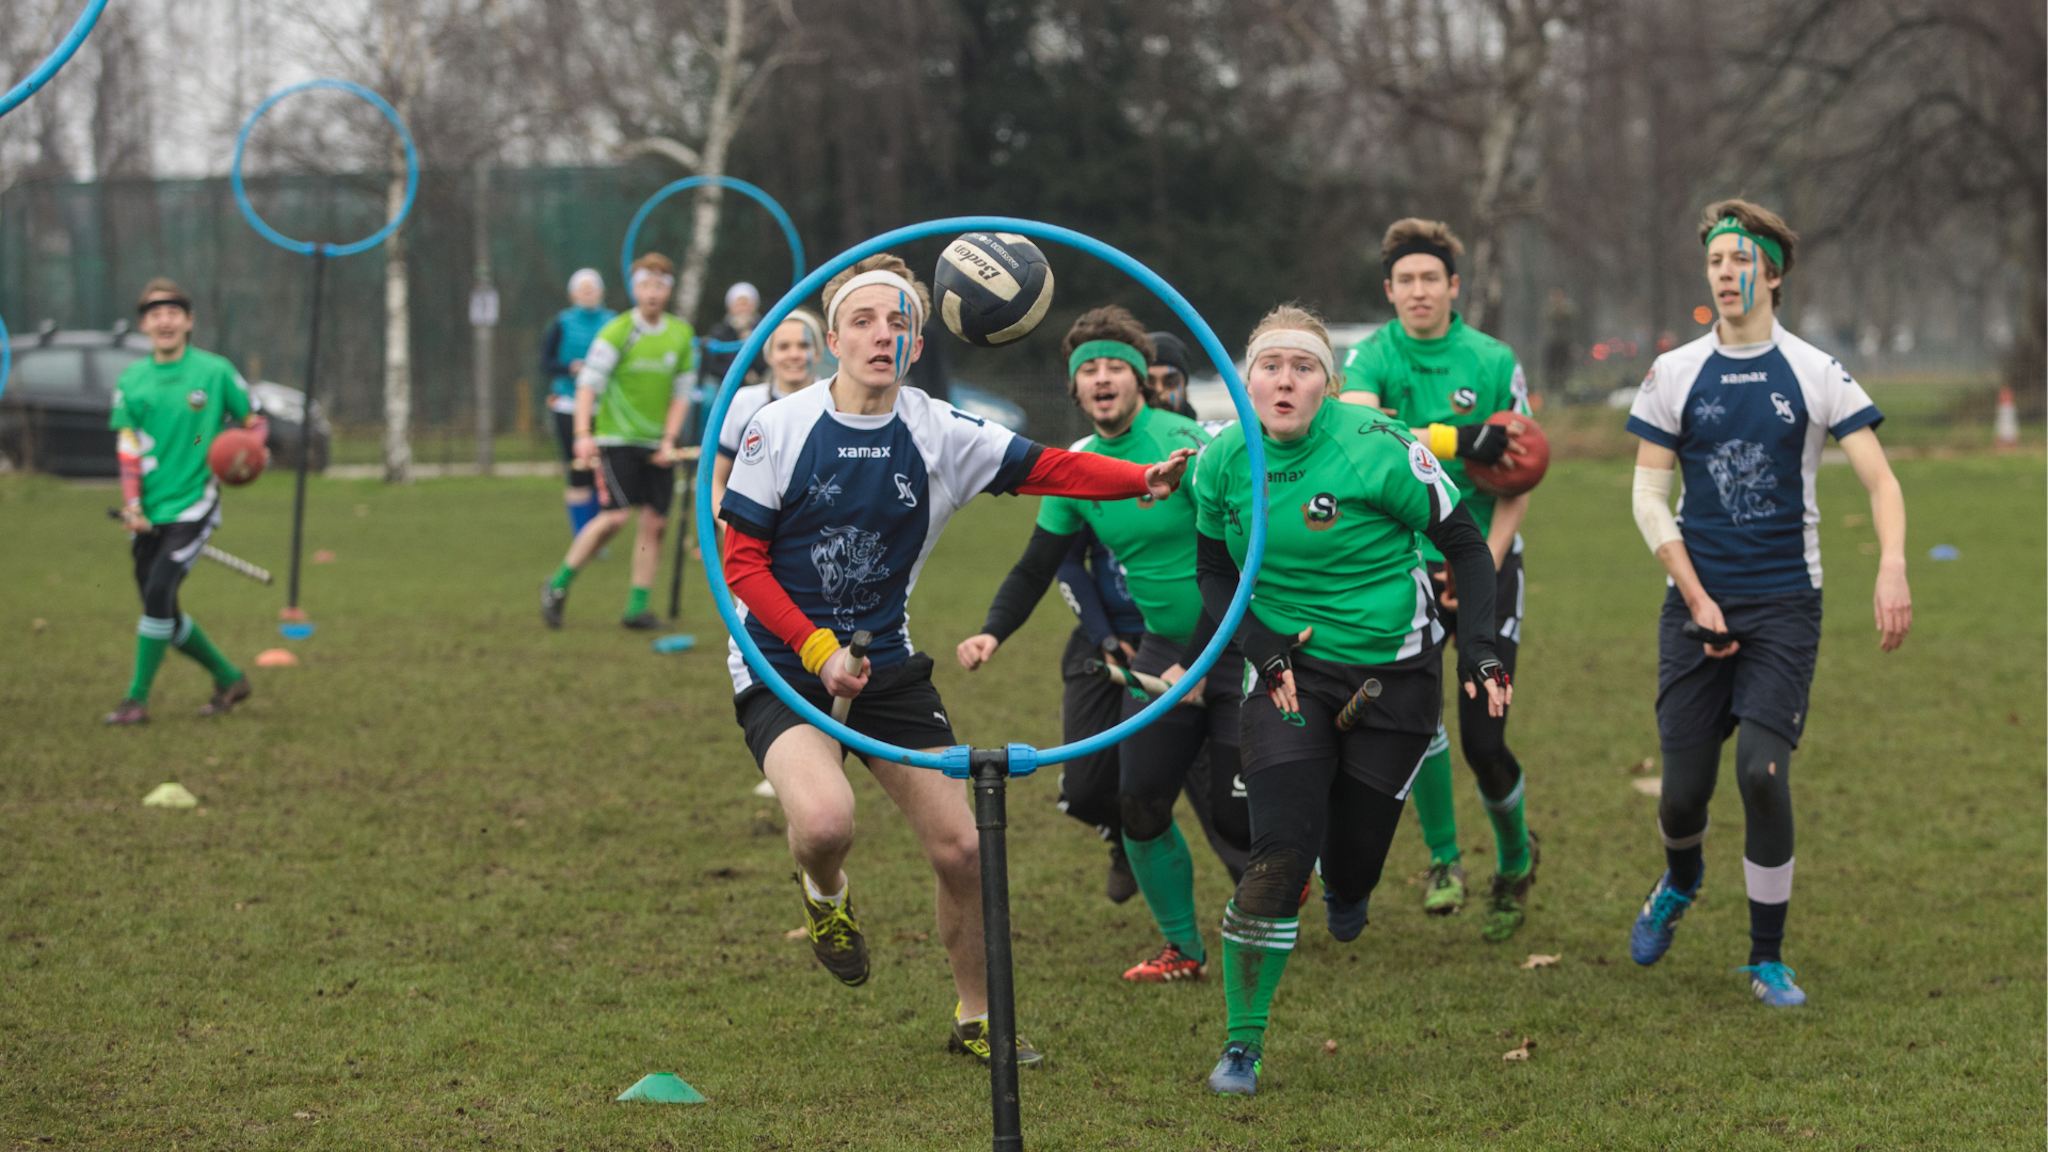 The Muggle Quidditch Crumpet Cup Is Played In London LONDON, ENGLAND - FEBRUARY 18: The Keele Squirrels (in green) play the Radcliffe Chimeras during the Crumpet Cup quidditch tournament on Clapham Common on February 18, 2017 in London, England.